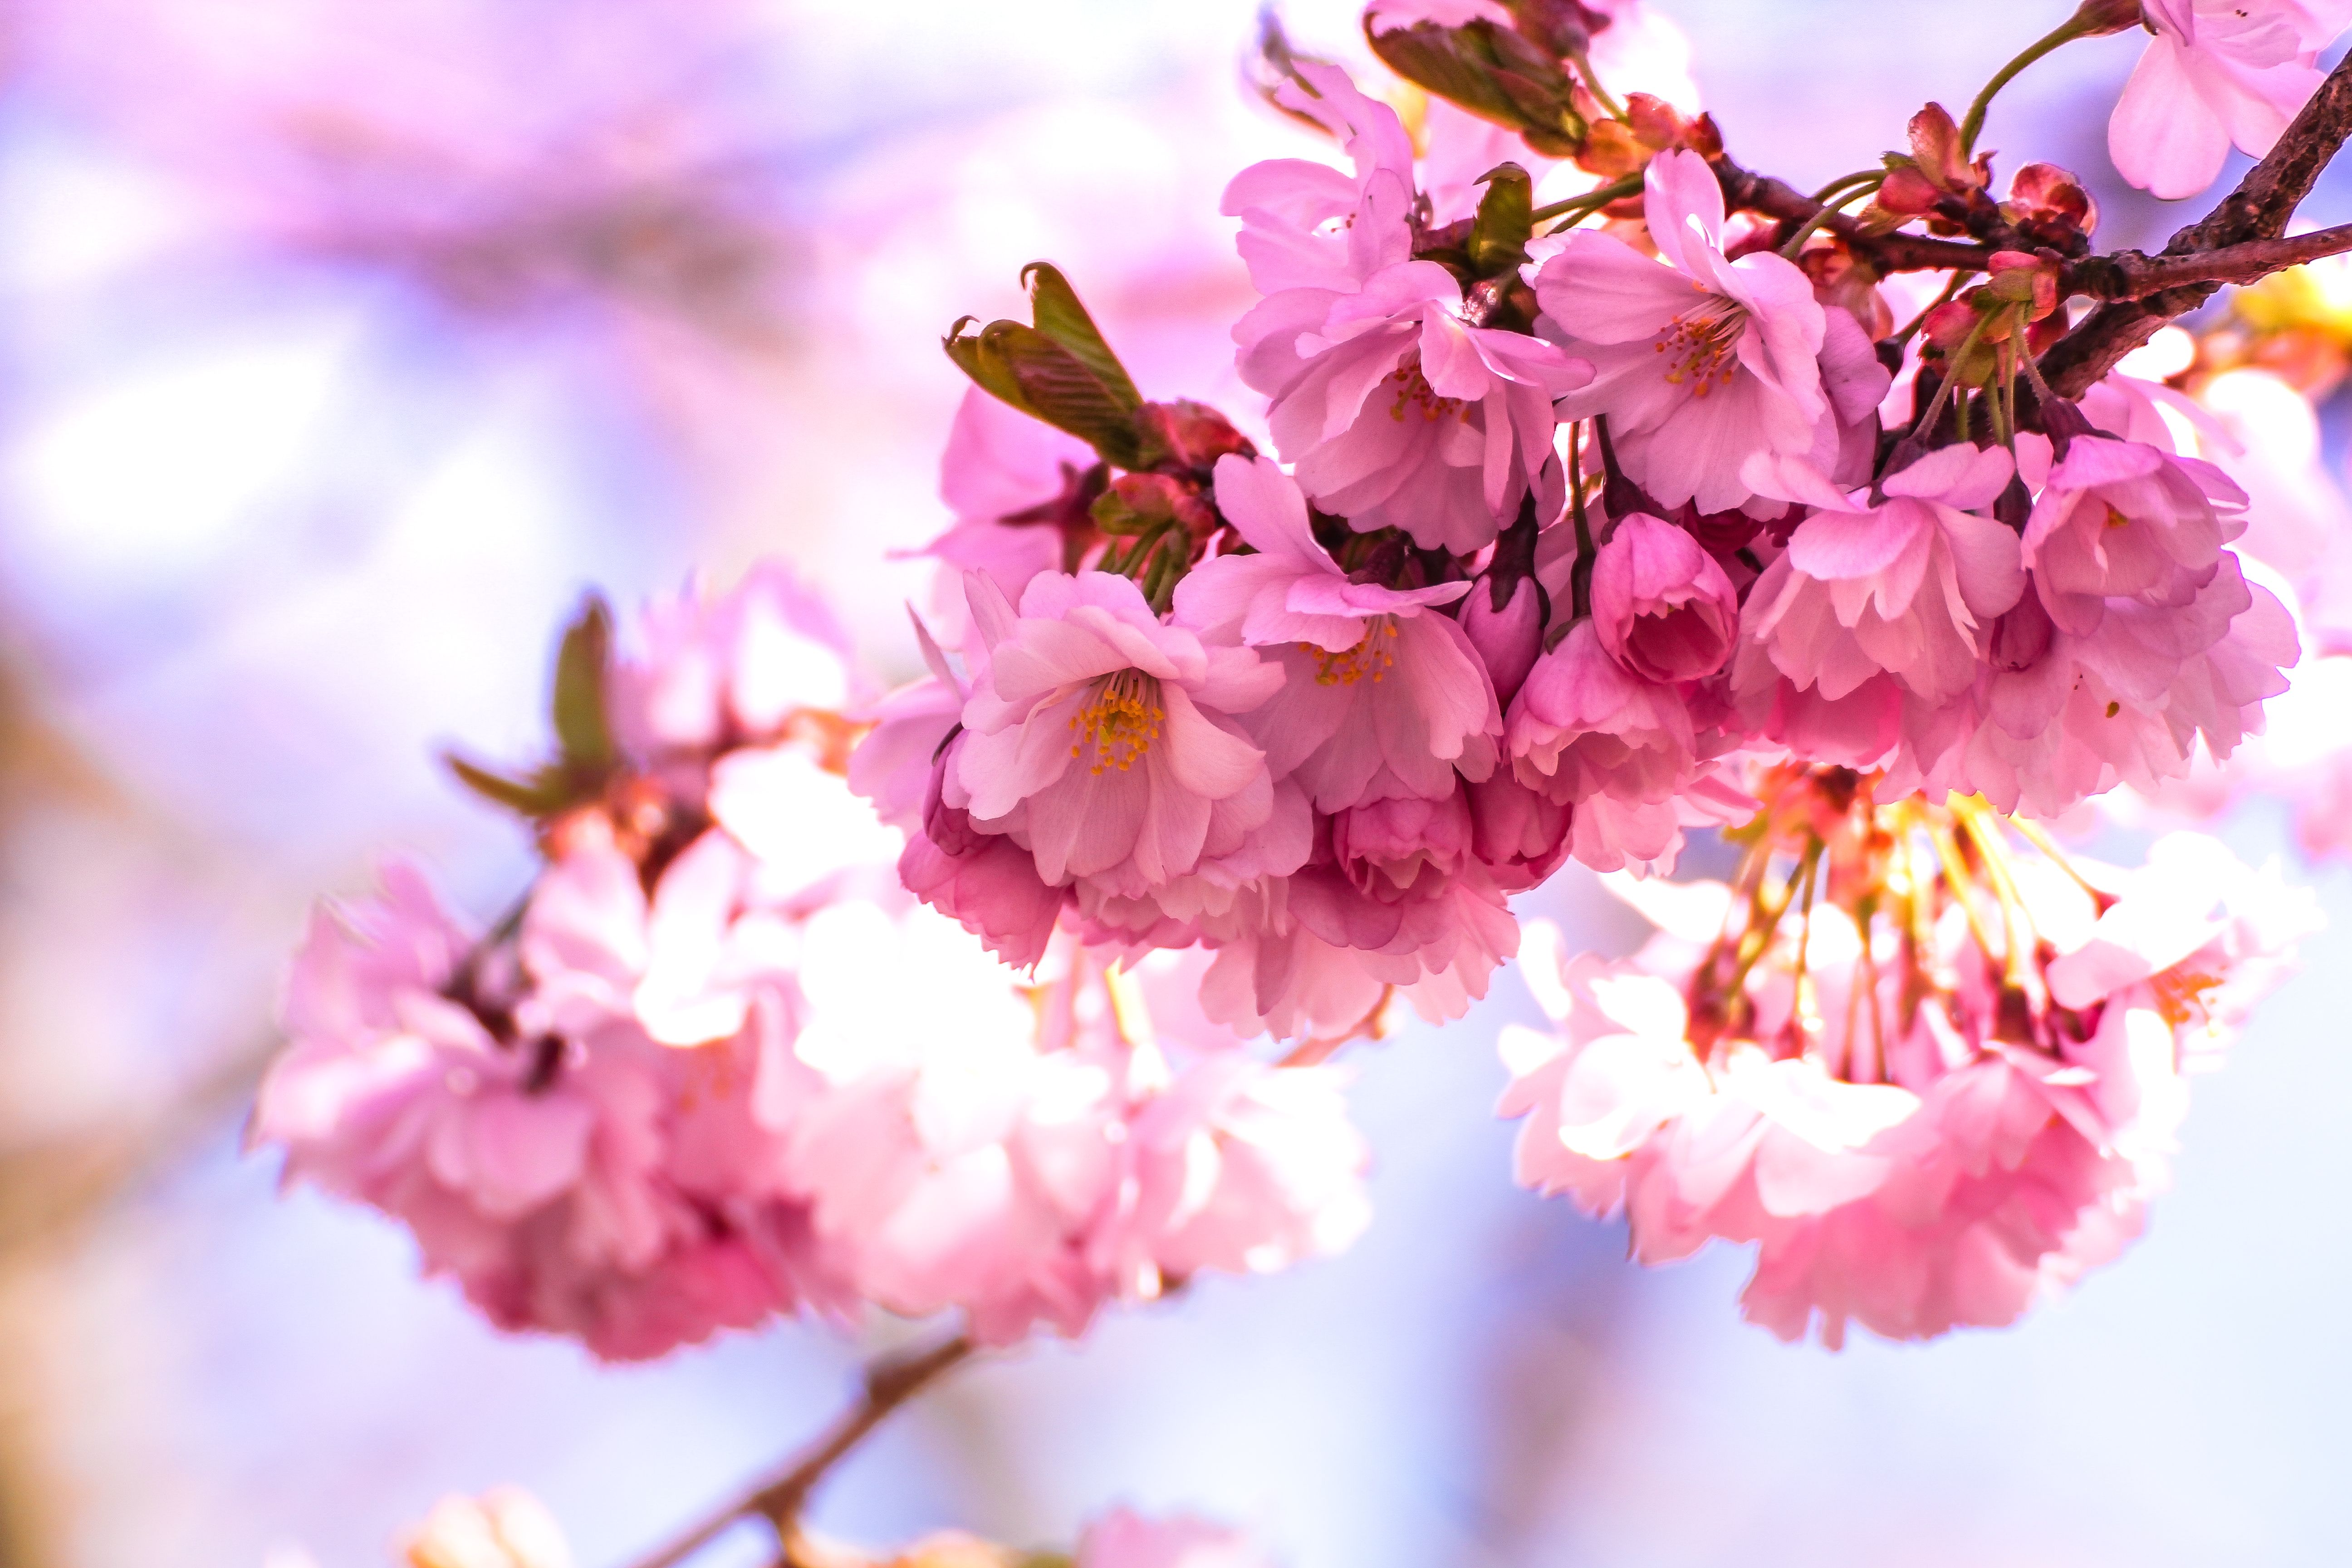 Free Image, nature, branch, blur, plant, flower, petal, bloom, floral, food, produce, colourful, colorful, pink, flora, cherry blossom, flowers, close up, macro photography, HD wallpaper, spring summer 5184x3456